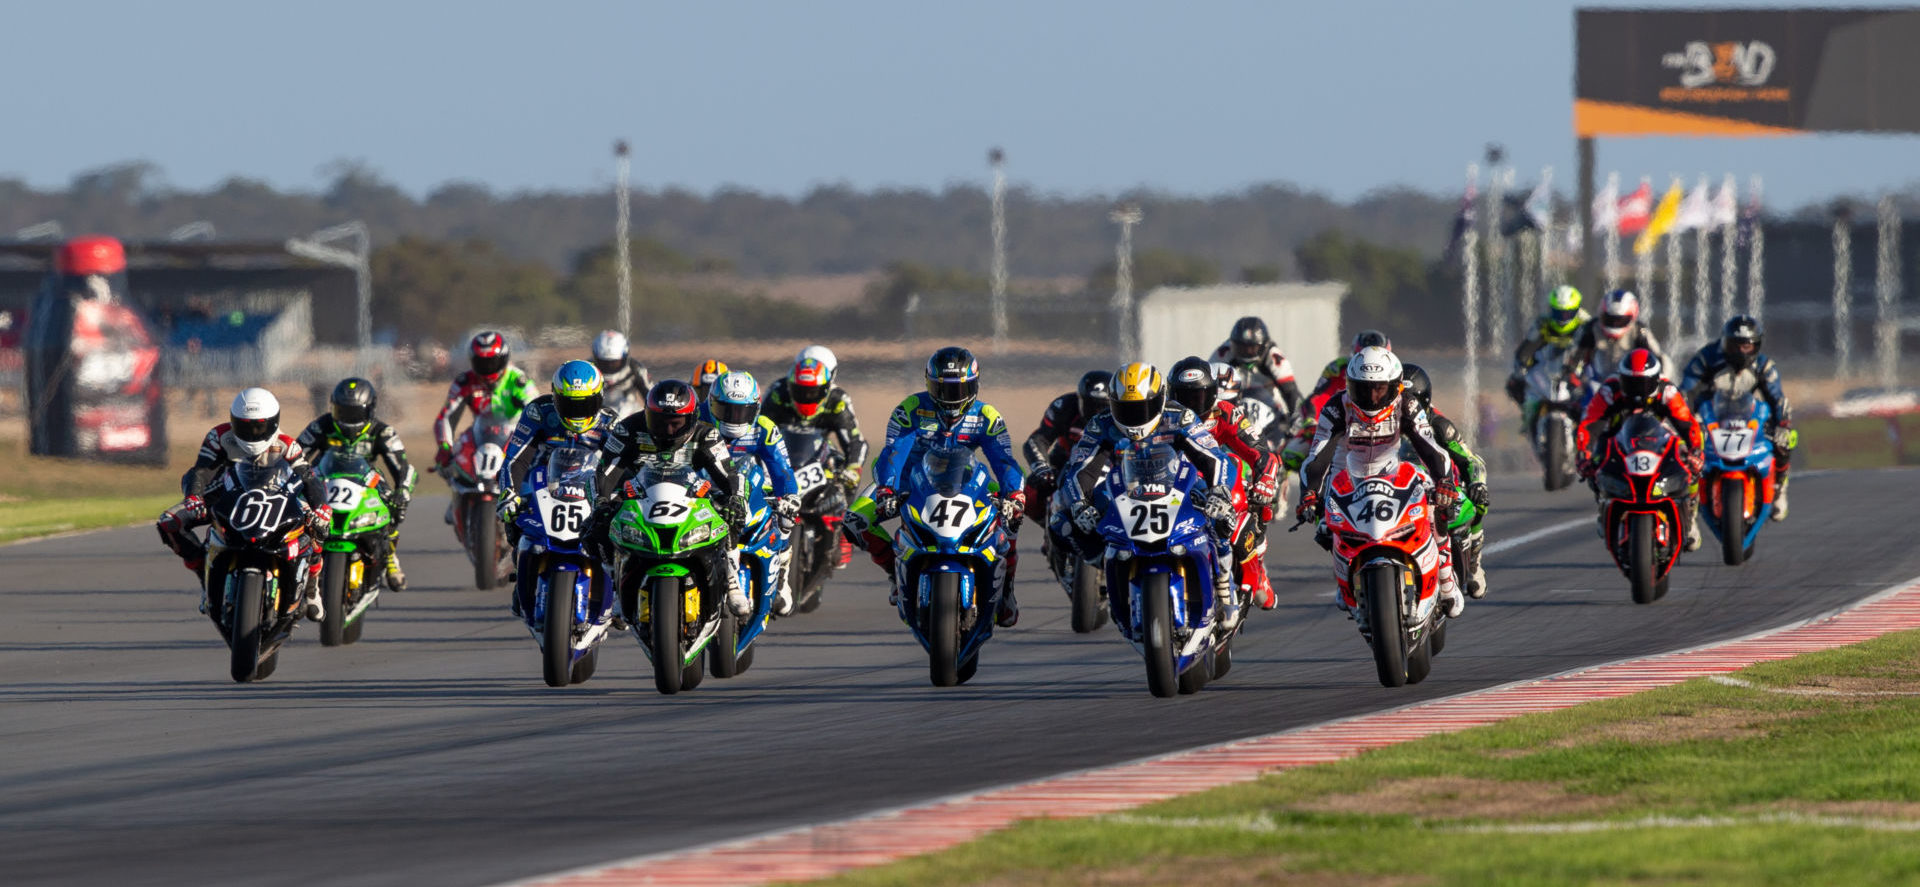 Action from an Australian Superbike race at The Bend in 2019. Photo by Andrew Gosling/TBG Sport, courtesy of Motorcycling Australia.